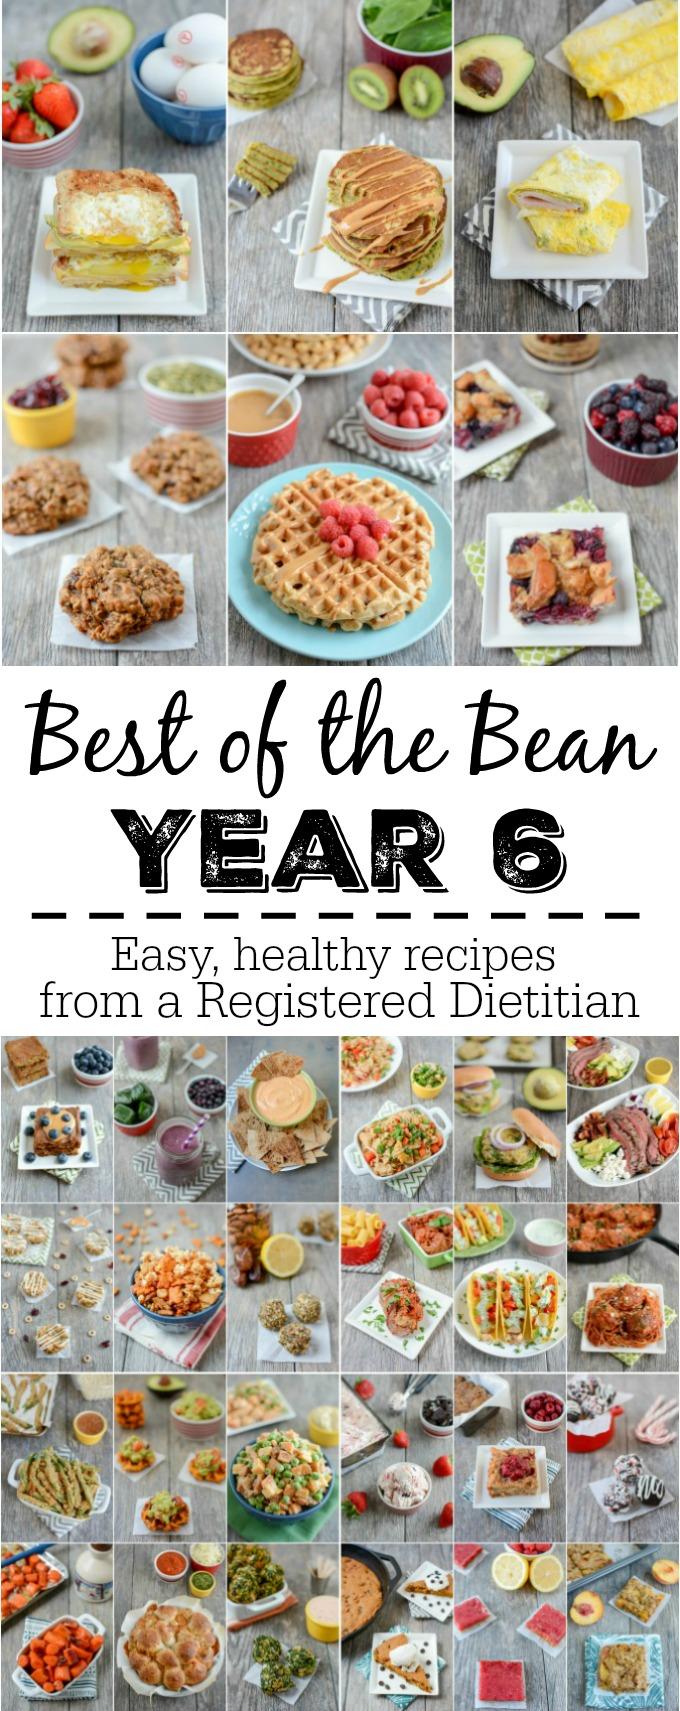 A year of healthy recipes from a Registered Dietitian.